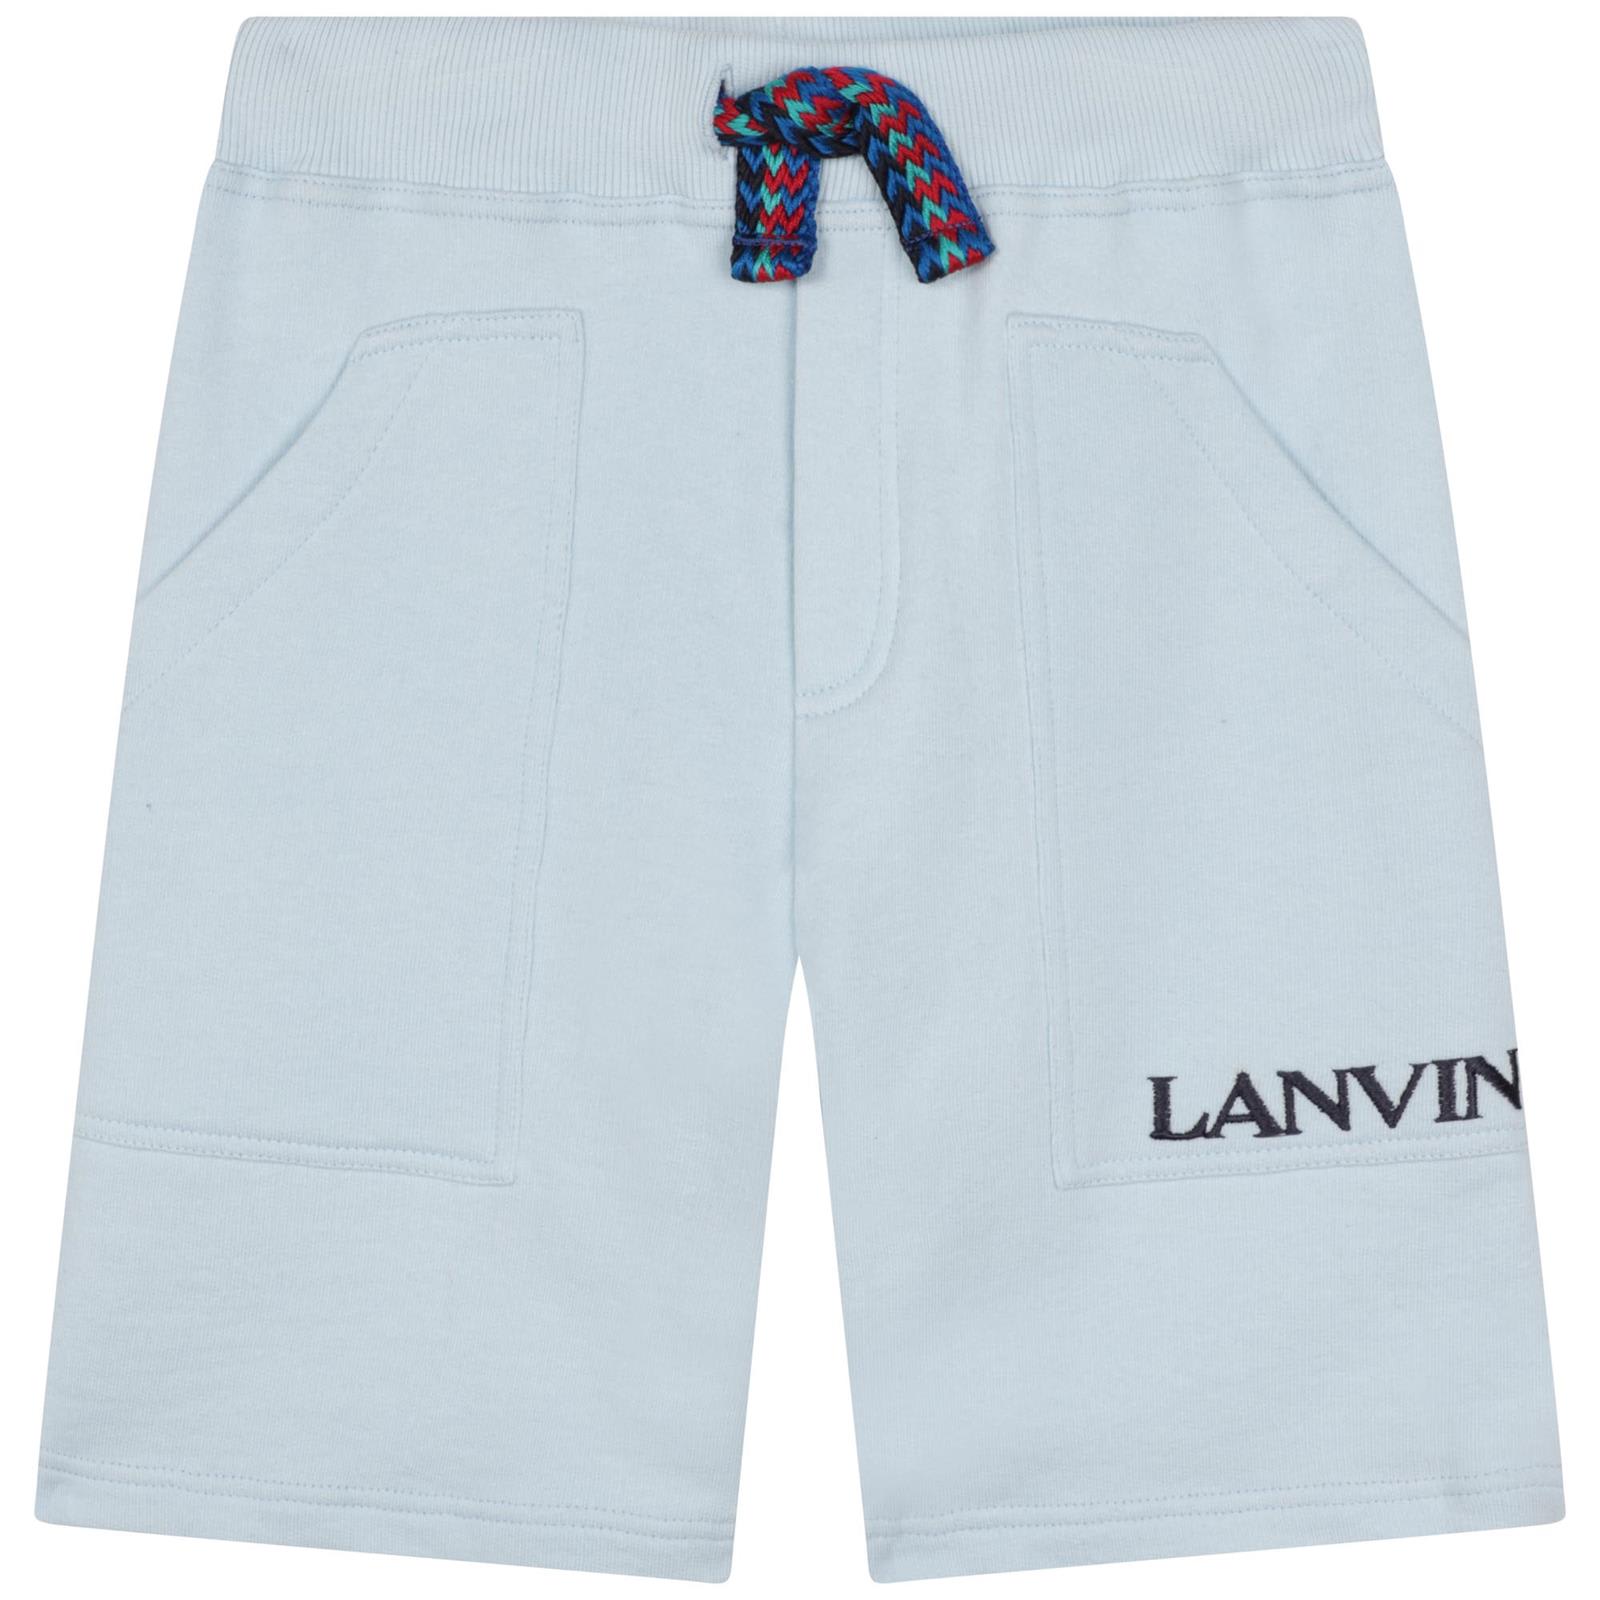 LANVIN SPORTS SHORTS WITH EMBROIDERY